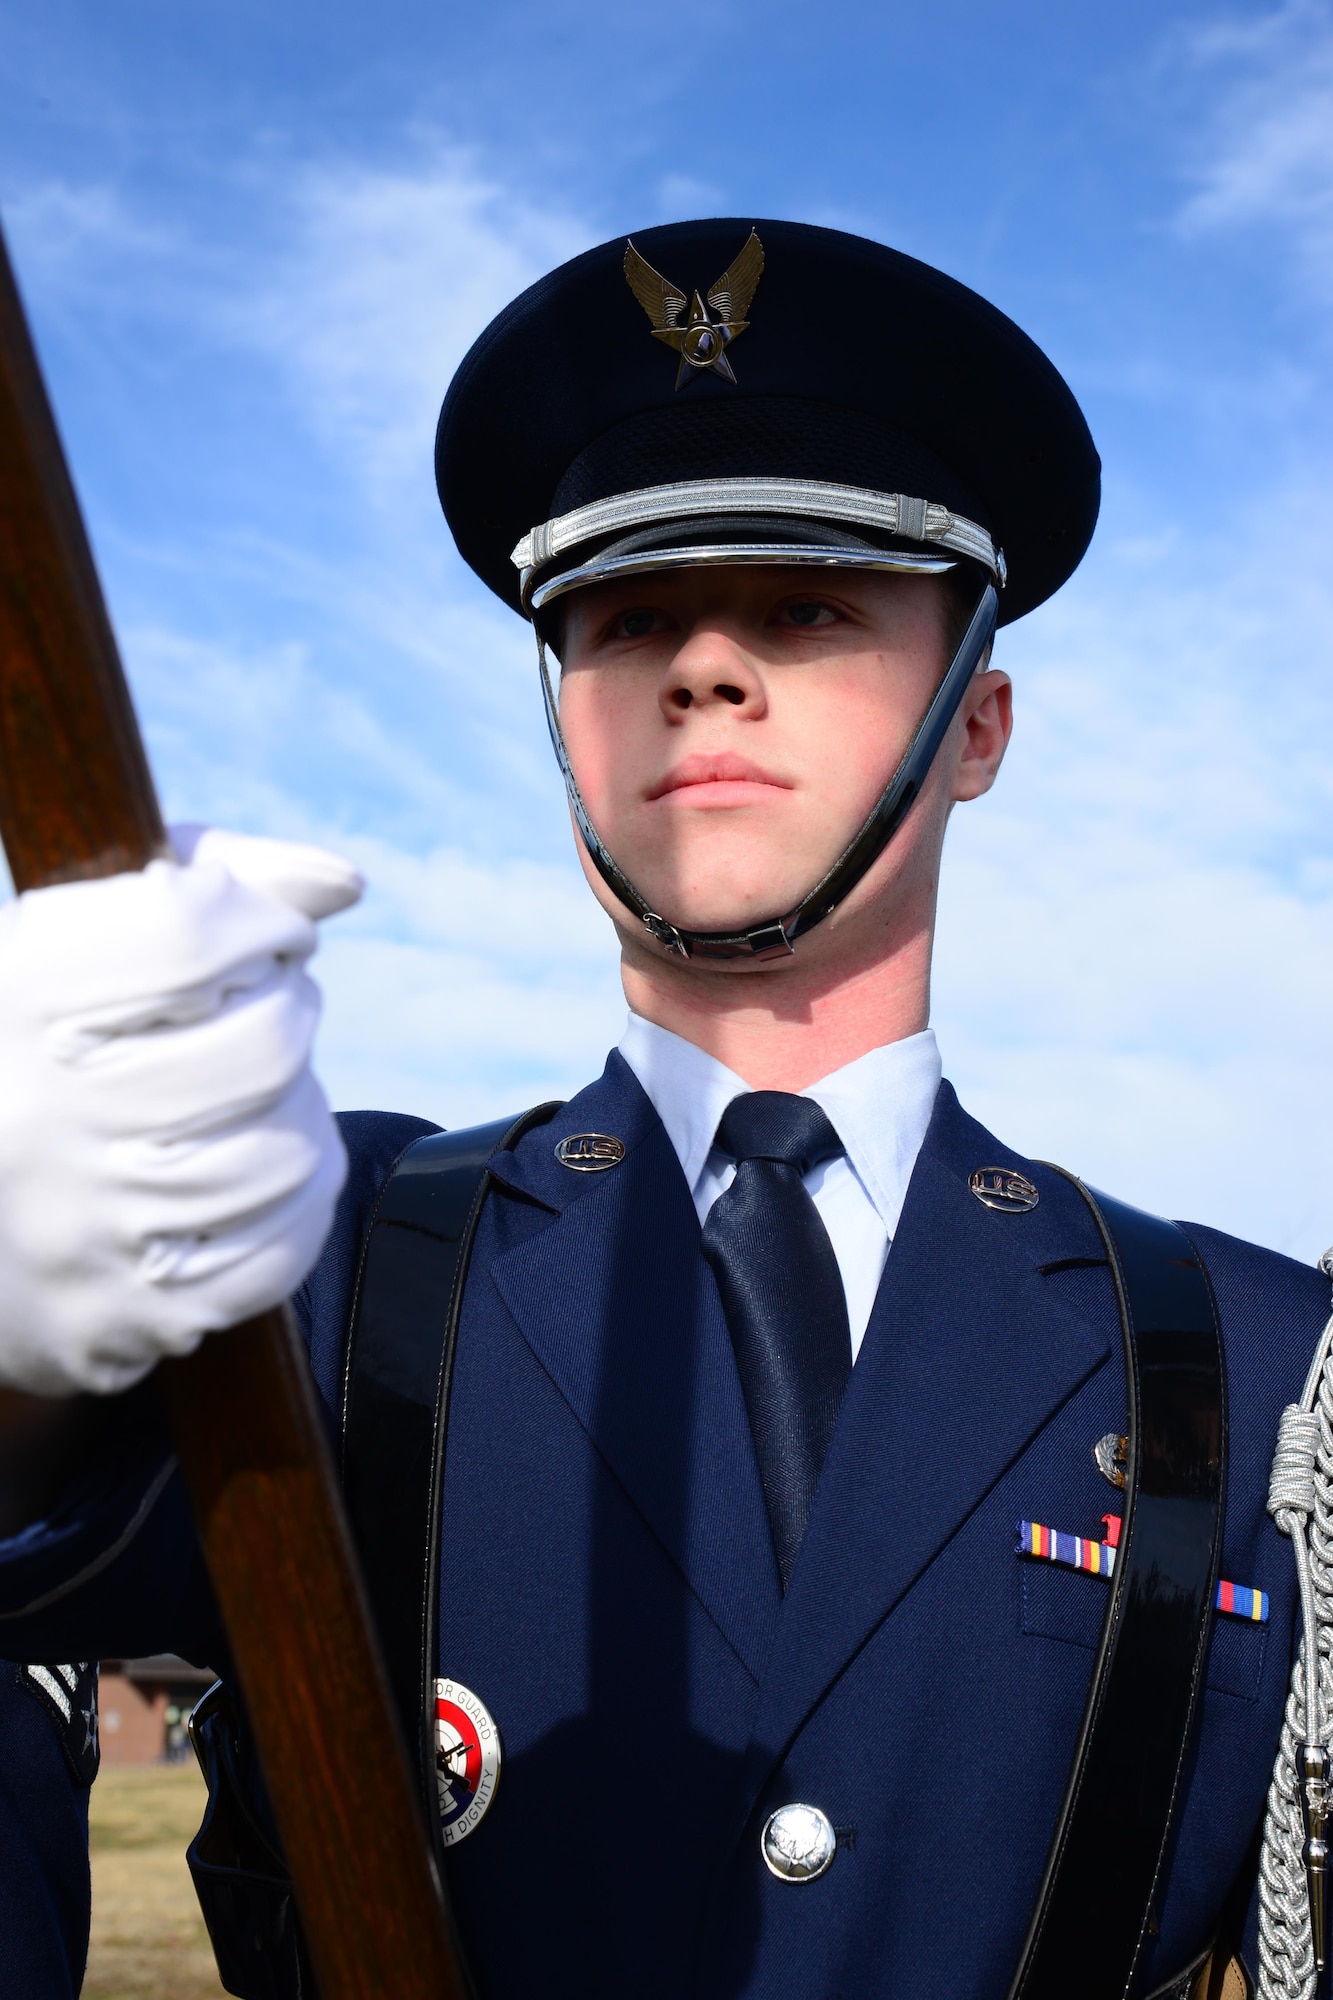 Airman 1st Class Taylor Brown, 741st Maintenance Squadron power refrigeration and electrical lab technician and prior member of the Malmstrom Honor Guard, presents the Air Force flag during a simulated color team Nov. 4, 2016, at Malmstrom Air Force Base, Mont. Brown recently earned the Base Honor Guard member award for the third quarter for going above and beyond his peers. (U.S. Air Force photo/Airman 1st Class Magen M. Reeves)